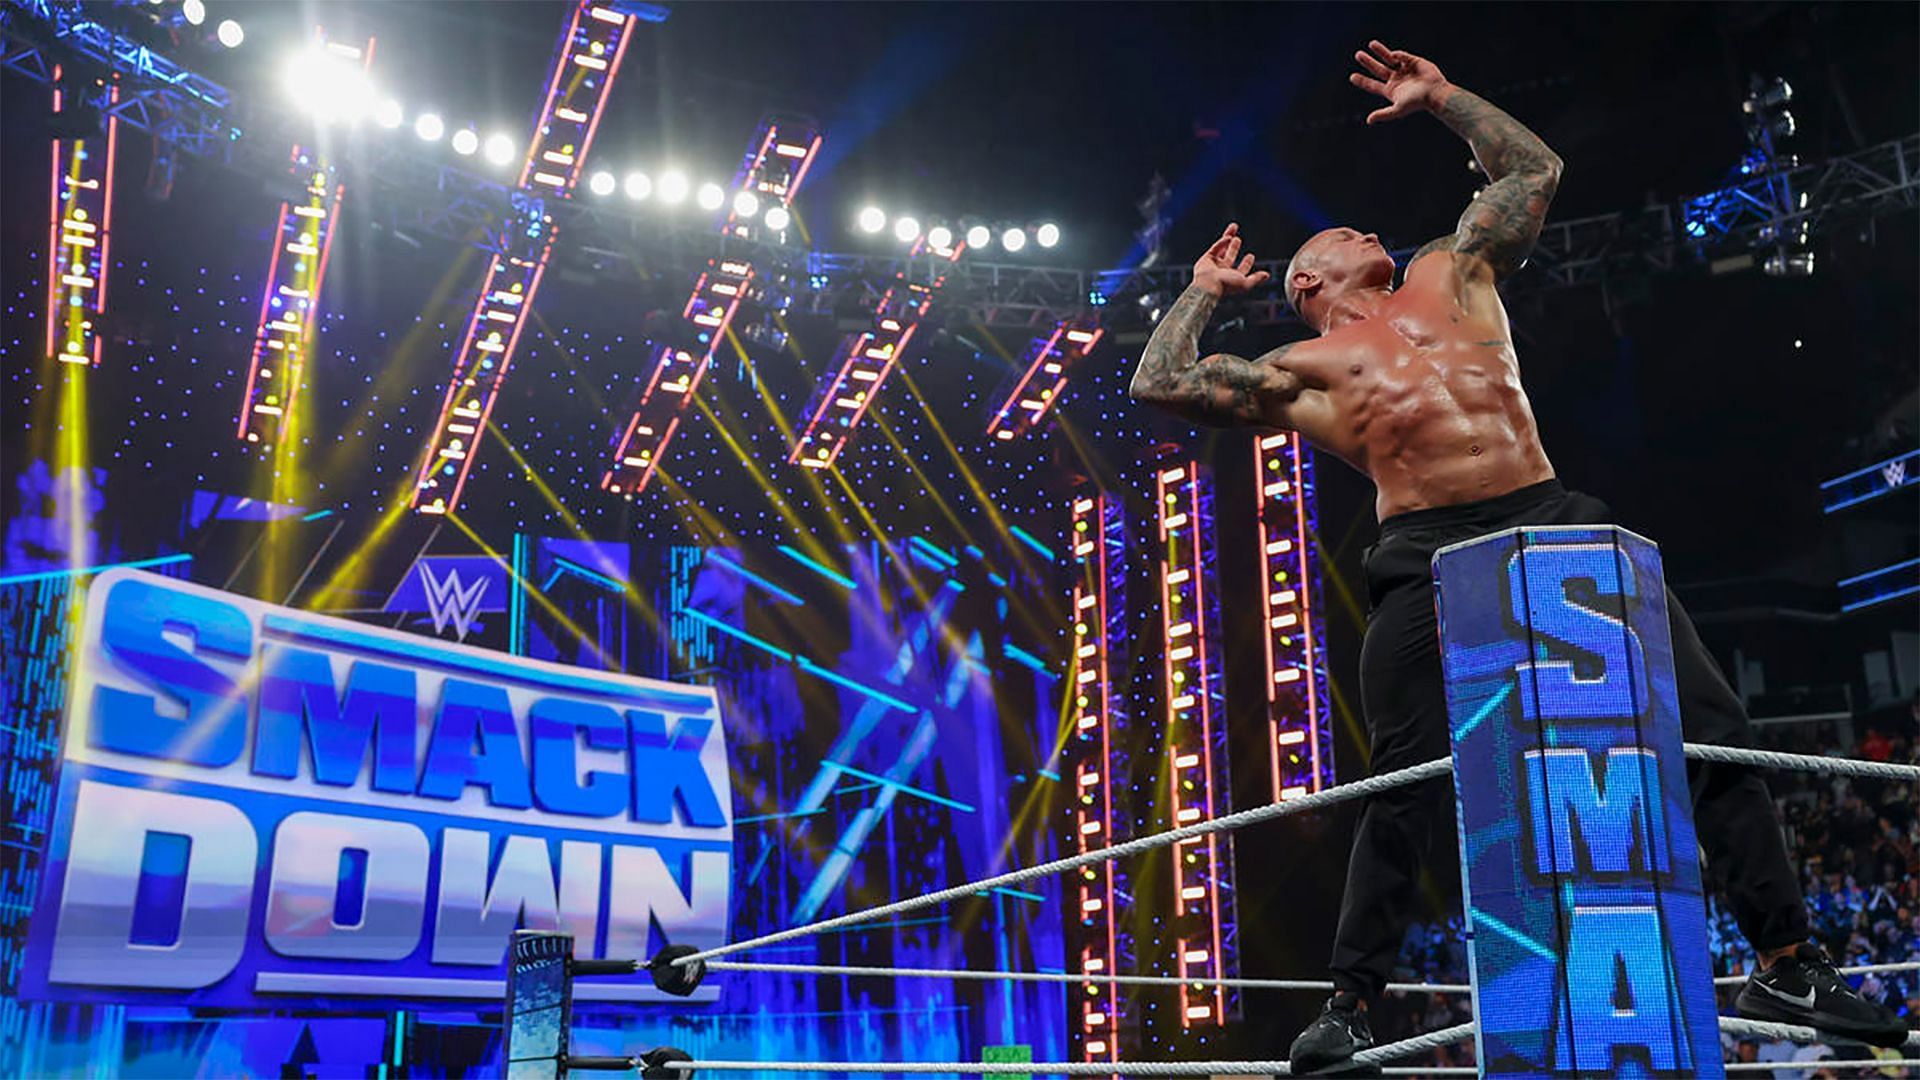 Randy Orton poses in the ring on WWE SmackDown